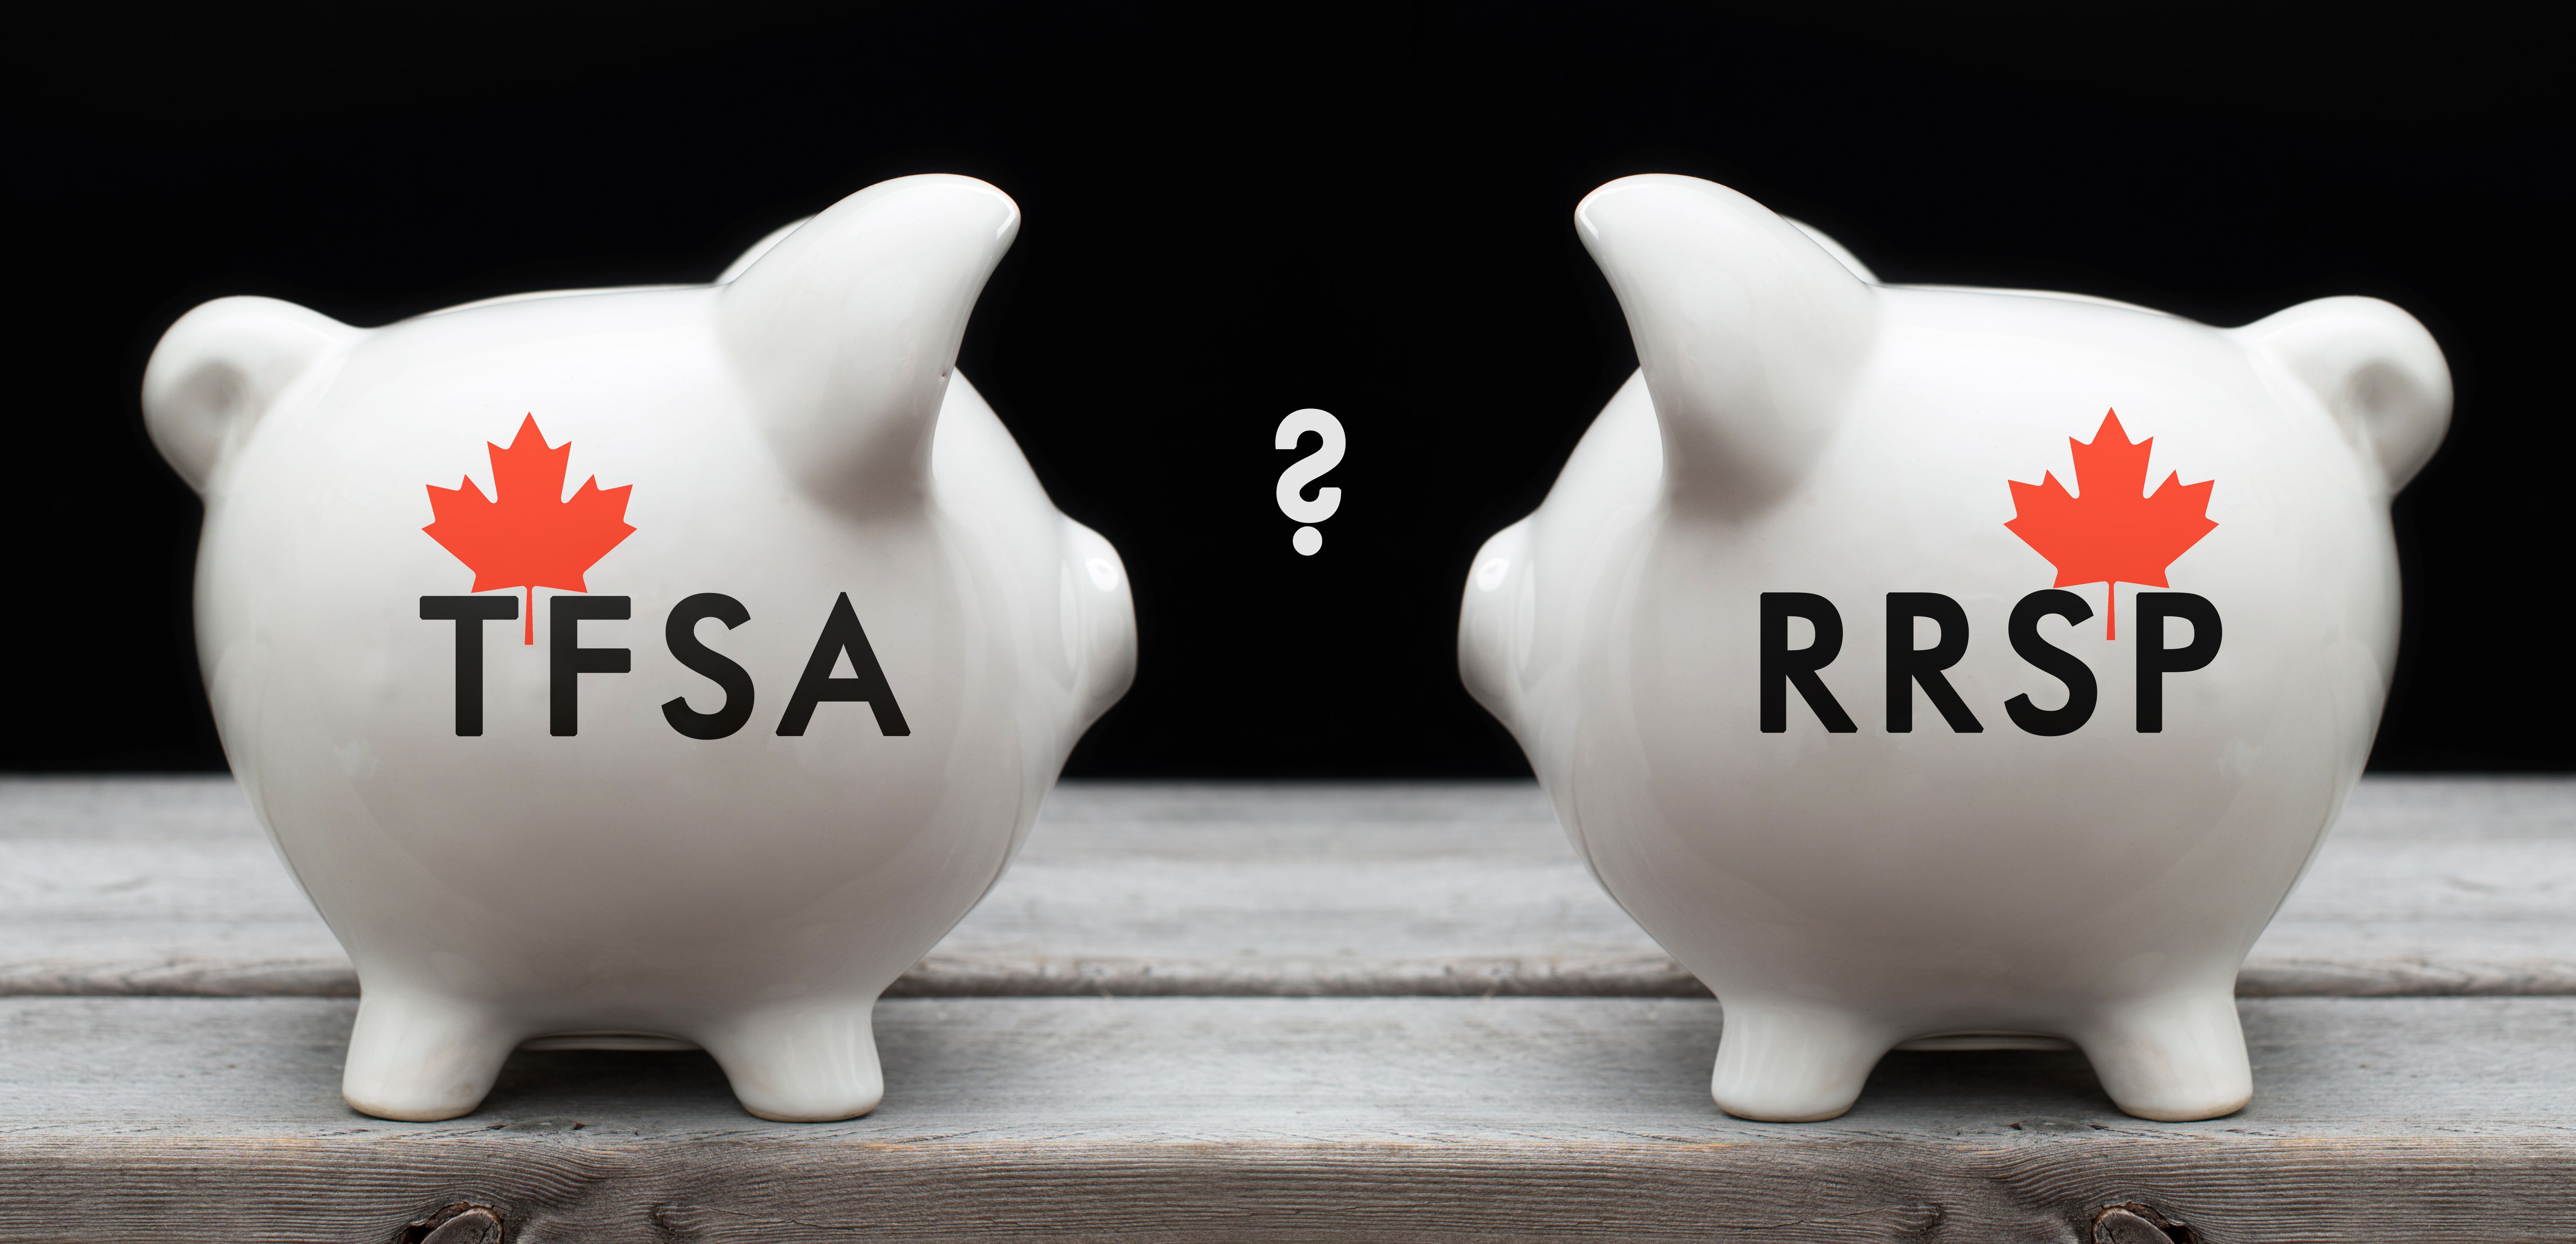 TFSA VS. RRSP-What's the Difference? Image